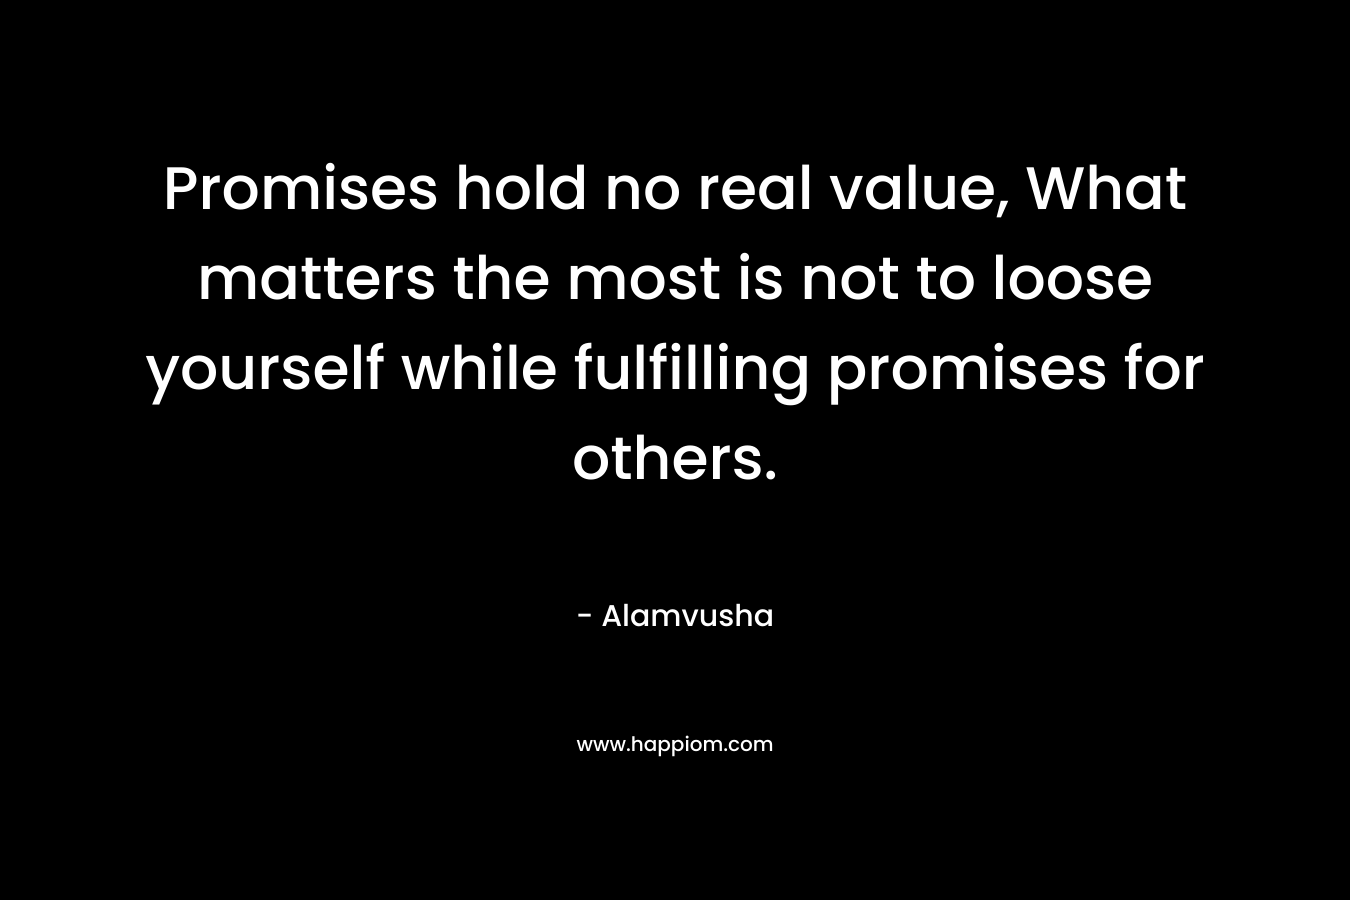 Promises hold no real value, What matters the most is not to loose yourself while fulfilling promises for others.